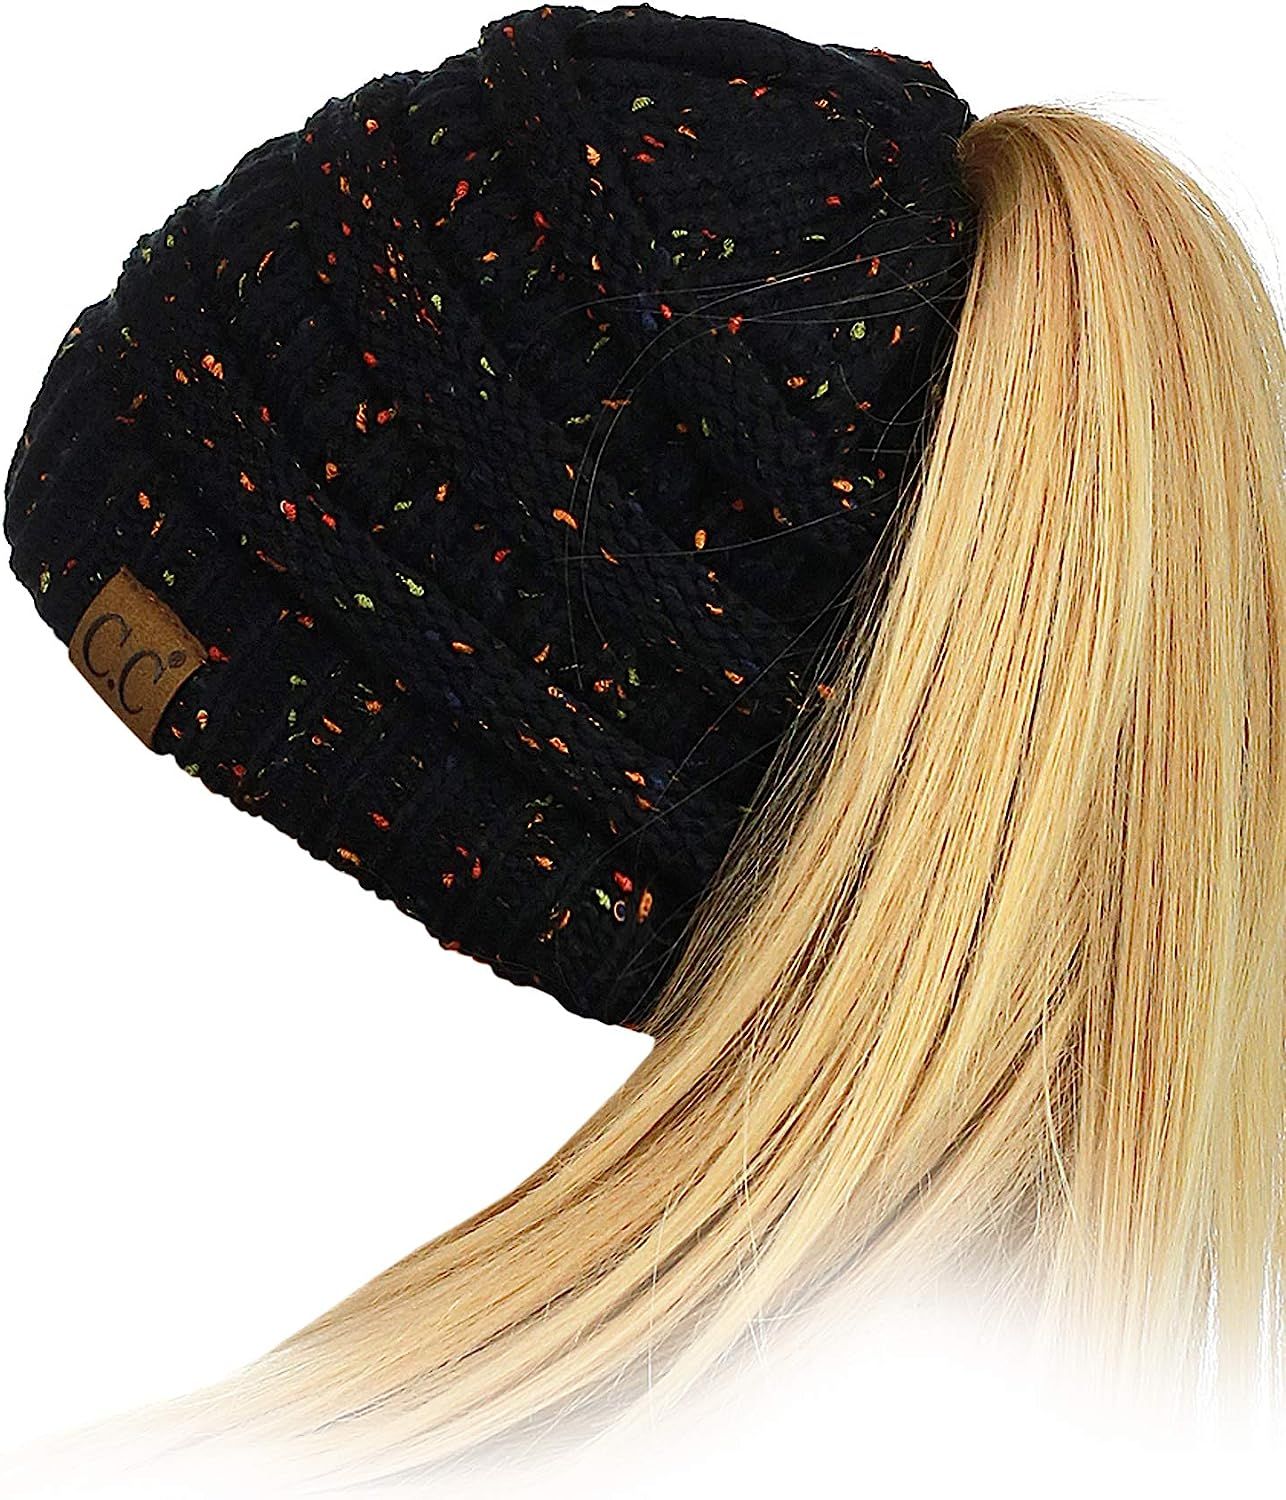 C.C BeanieTail Soft Stretch Cable Knit Messy High Bun Ponytail Beanie Hat | Amazon (US)